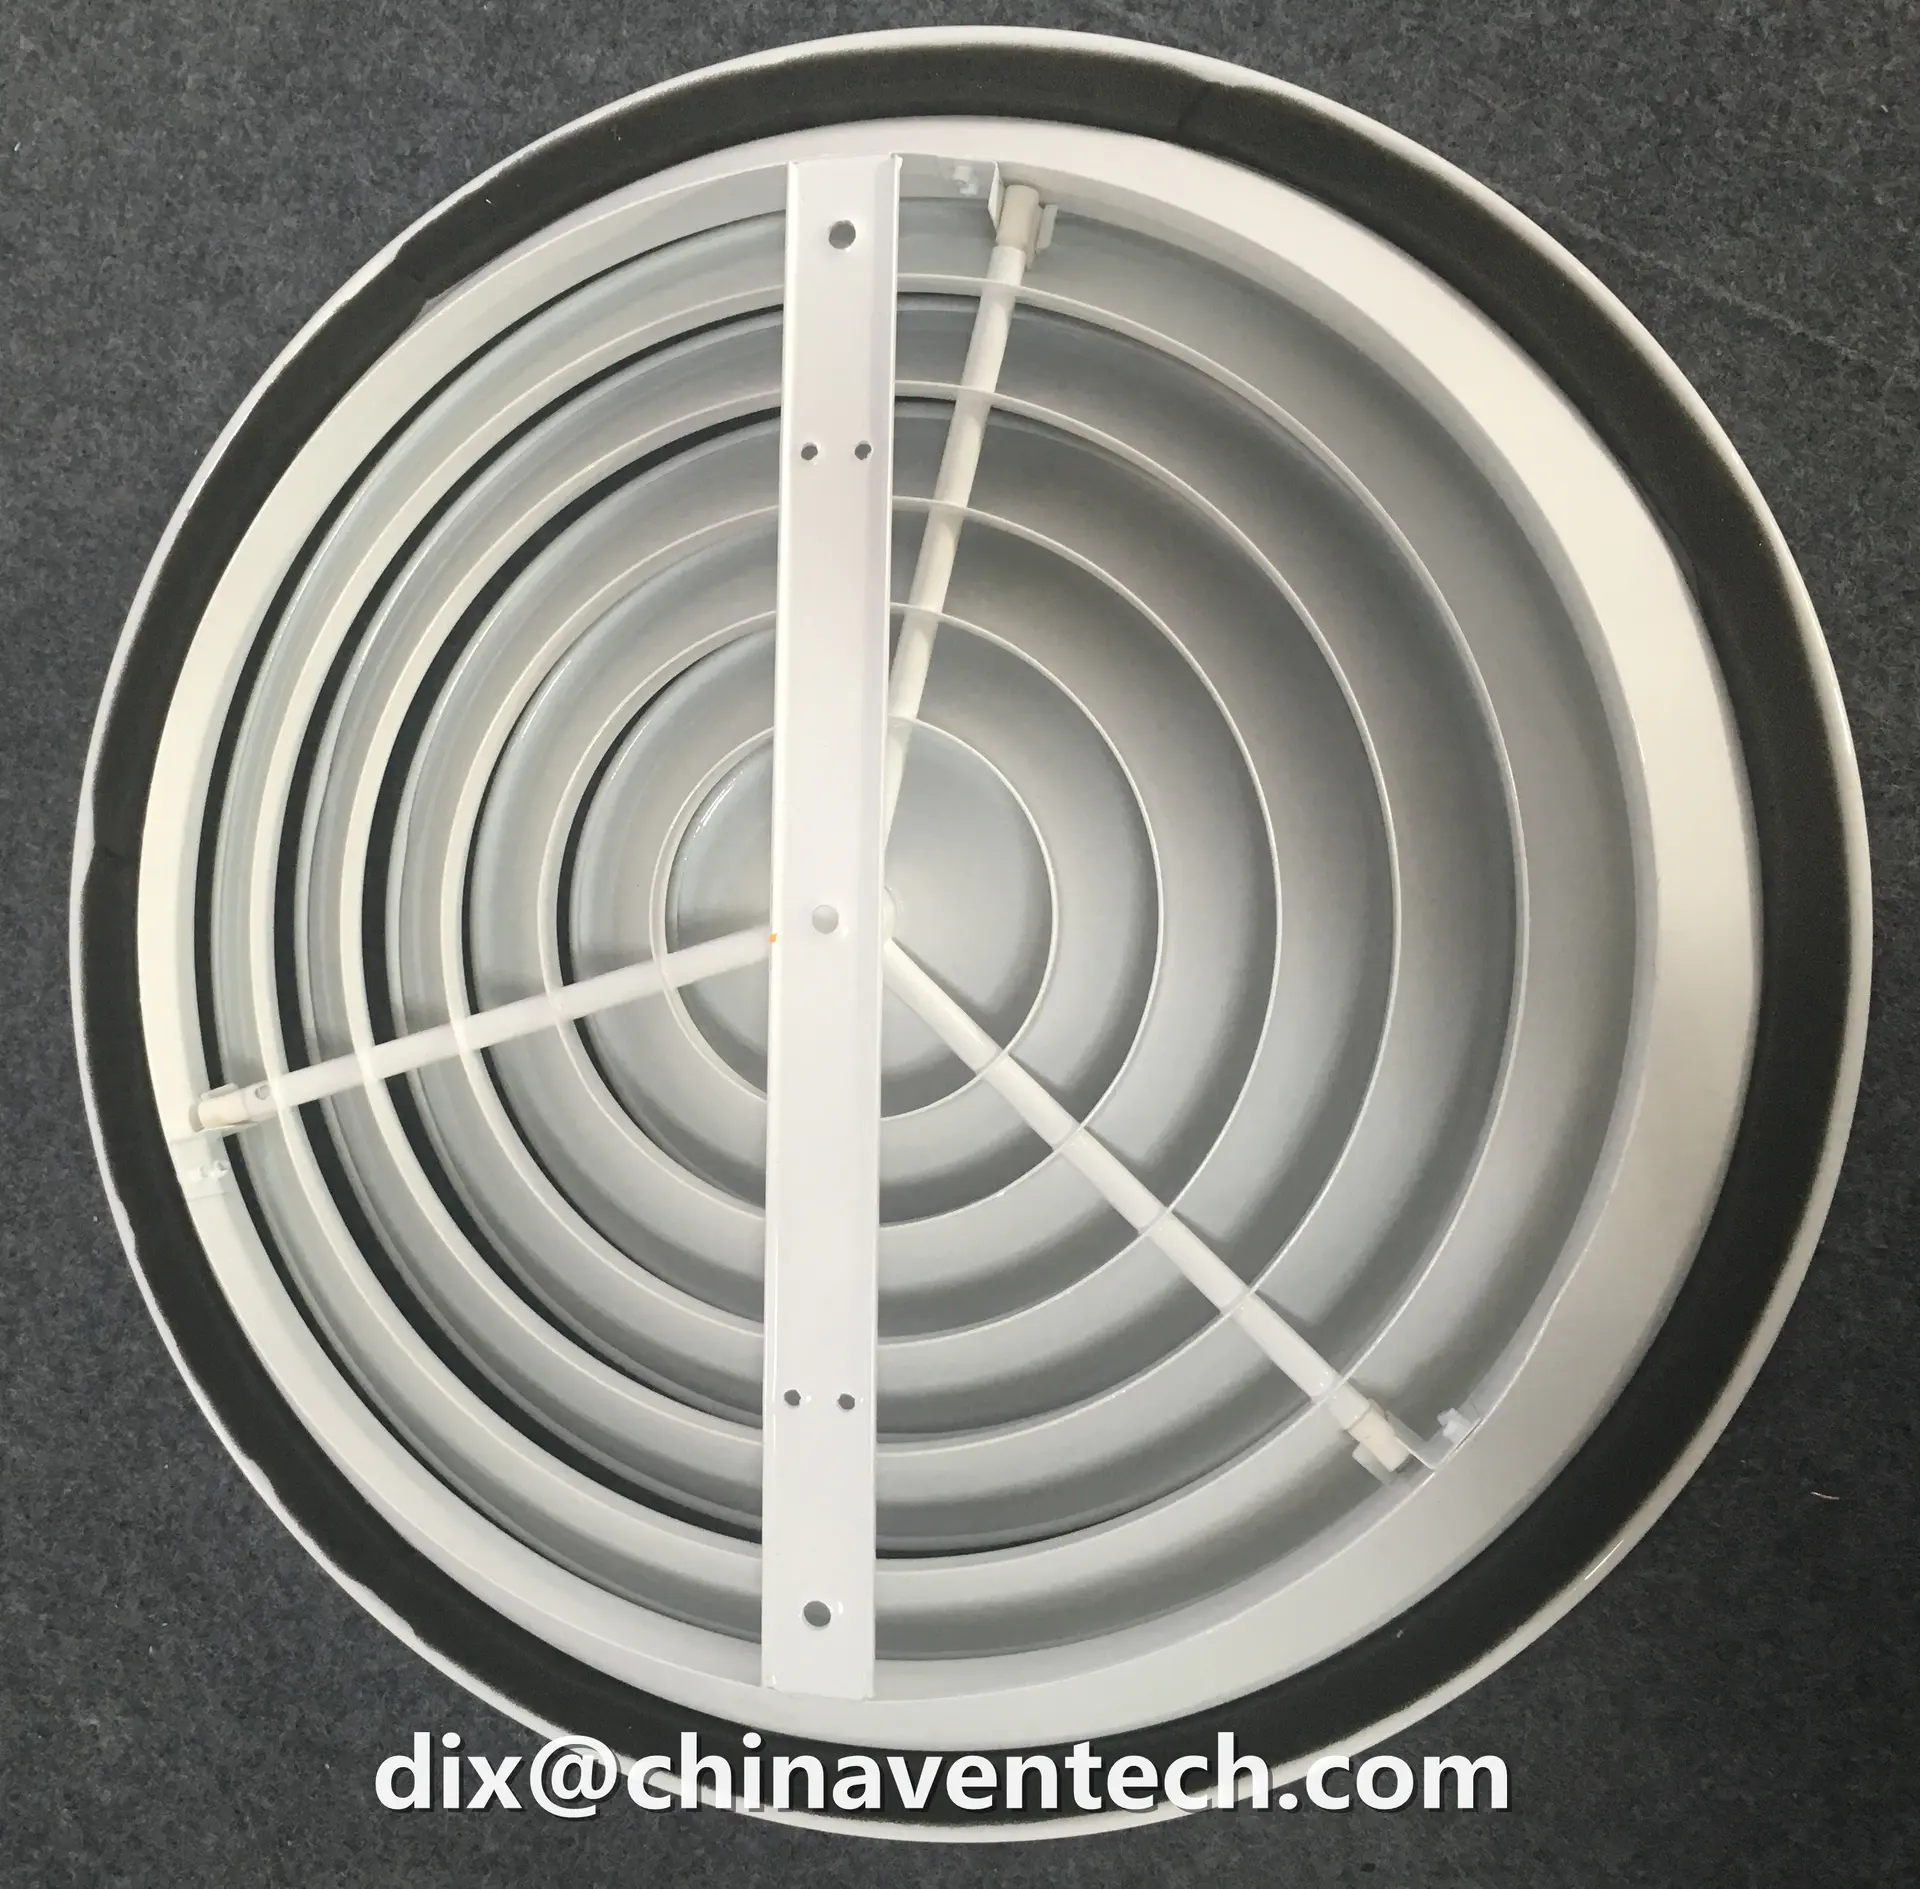 Duct Ceiling Air Galvanized Iron Floor Vent Grille Round Gratings